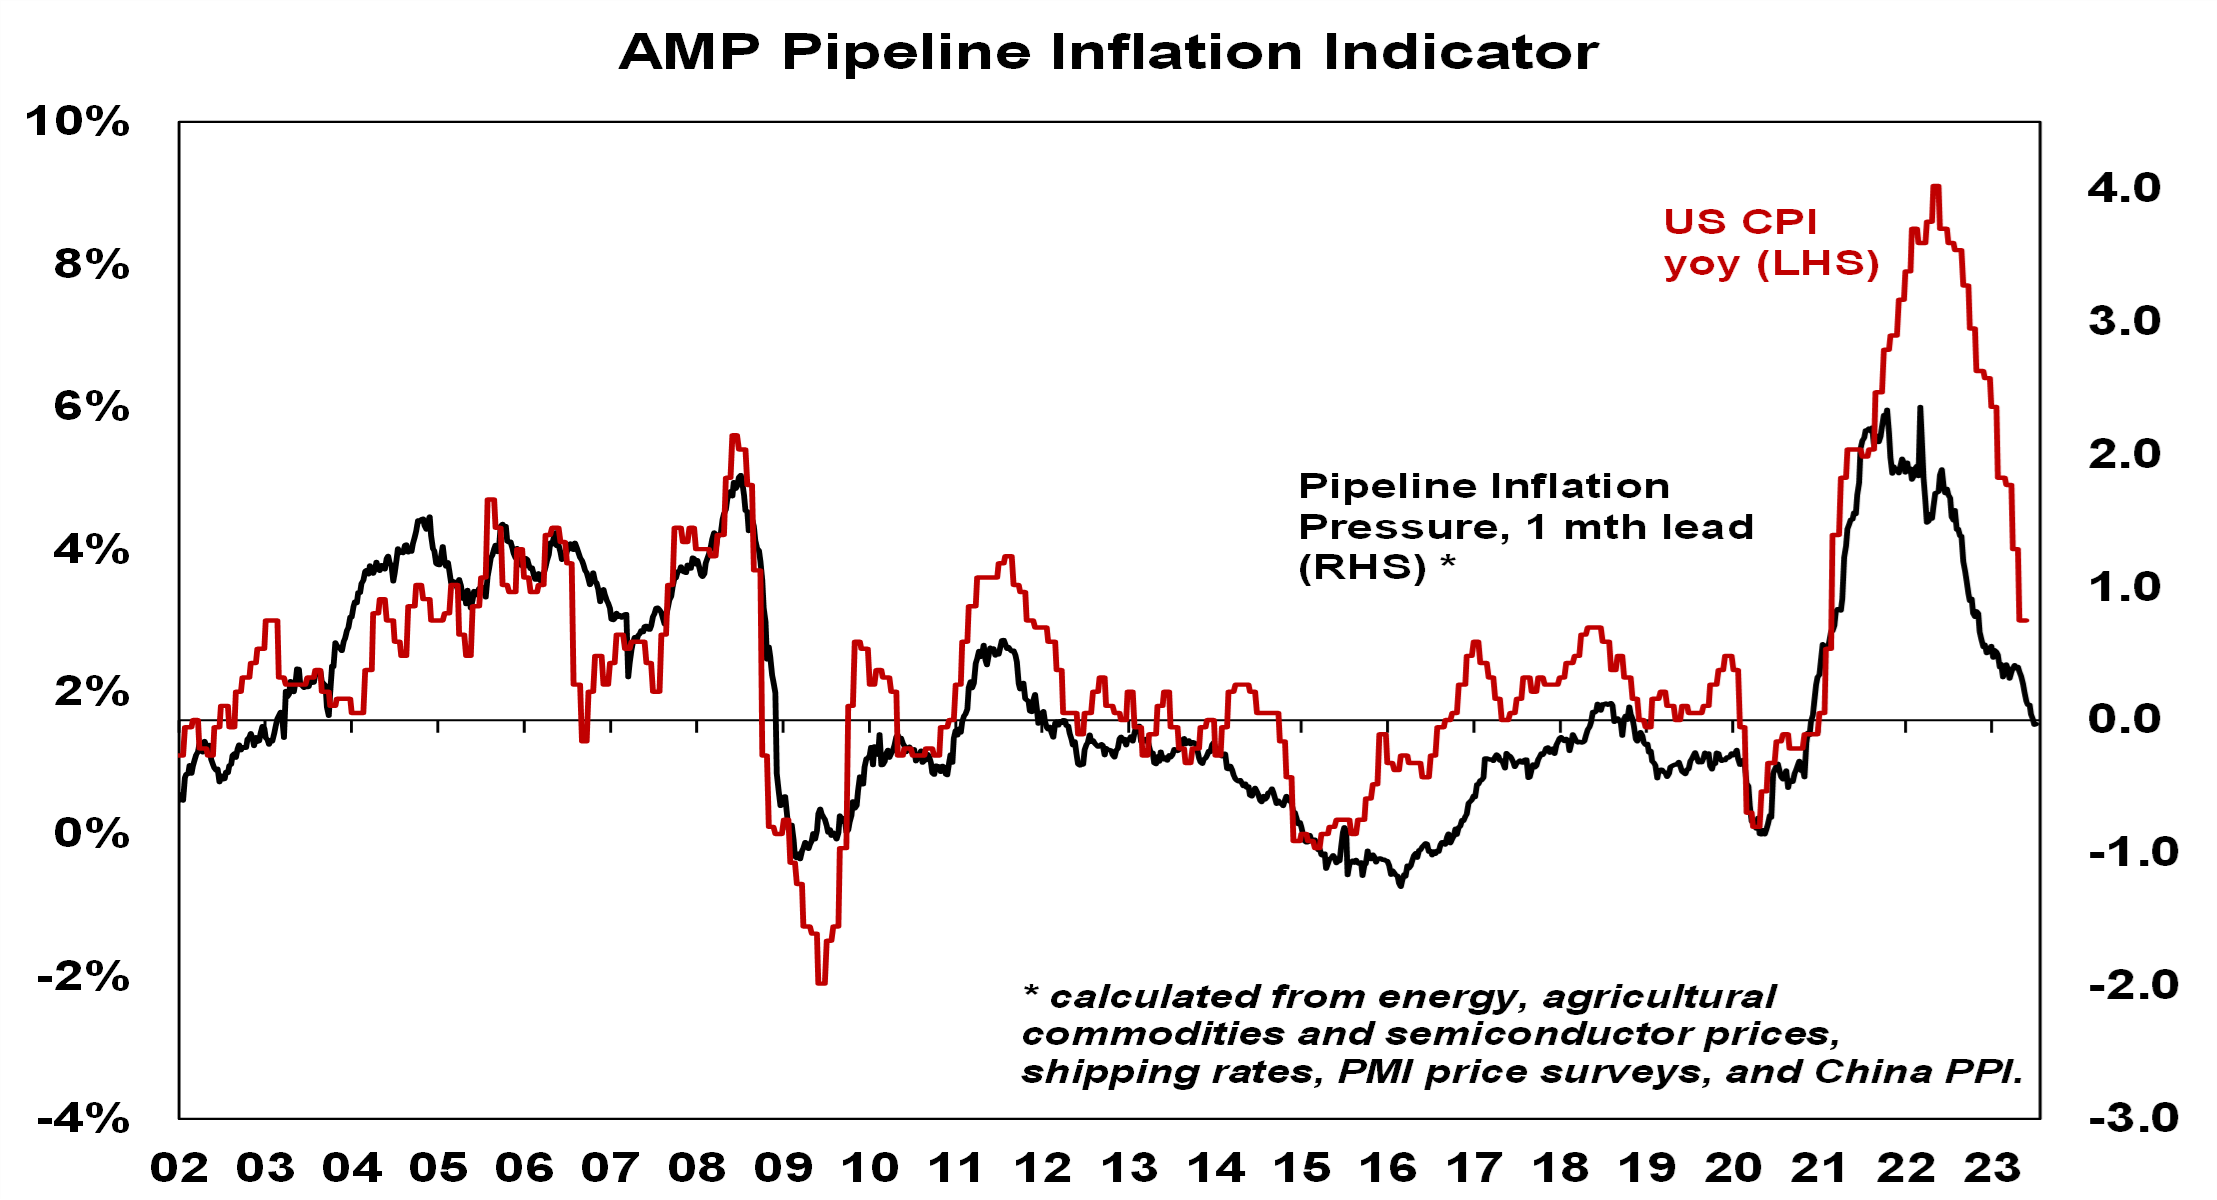 AMP Pipeline Inflation Indicator